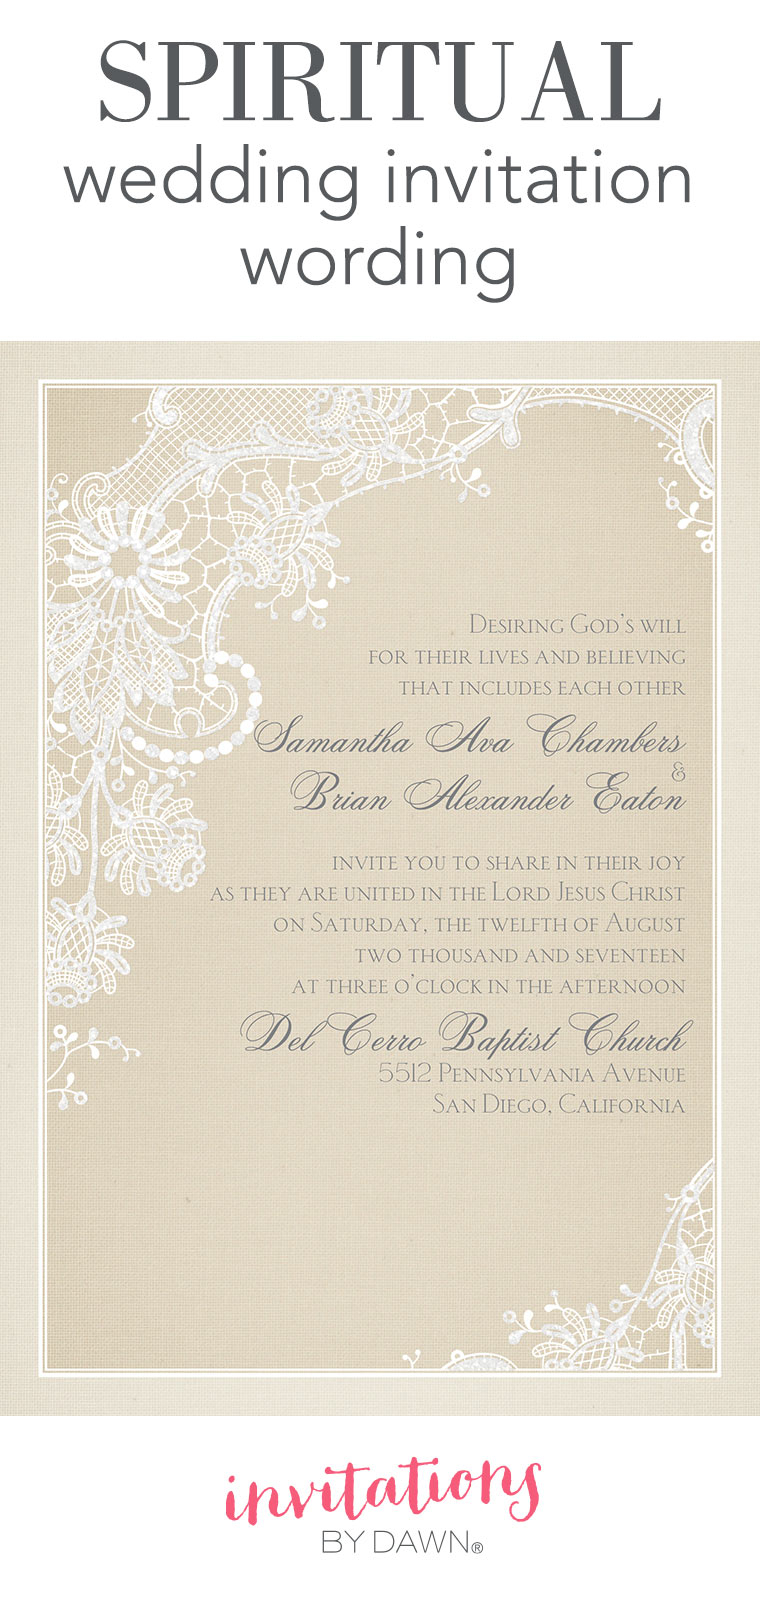 What To Write On A Wedding Invitation Spiritual Wedding Invitation Wording Invitations Dawn